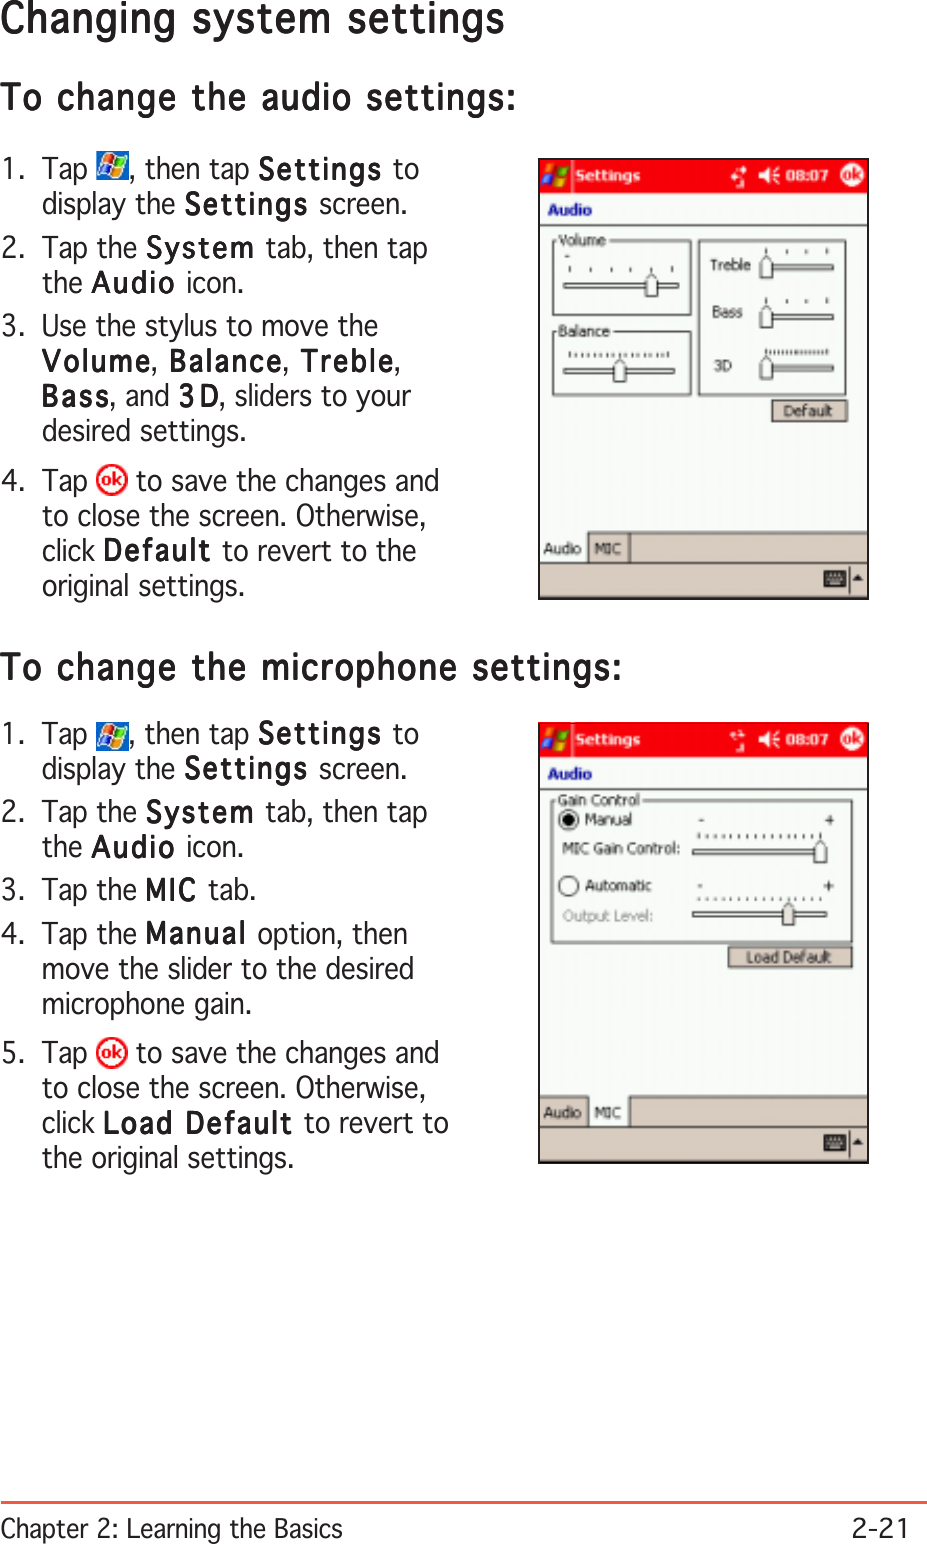 Chapter 2: Learning the Basics2-21Changing system settingsChanging system settingsChanging system settingsChanging system settingsChanging system settingsTo change the audio settings:To change the audio settings:To change the audio settings:To change the audio settings:To change the audio settings:1. Tap  , then tap SettingsSettingsSettingsSettingsSettings todisplay the SettingsSettingsSettingsSettingsSettings screen.2. Tap the SystemSystemSystemSystemSystem tab, then tapthe AudioAudioAudioAudioAudio icon.3. Use the stylus to move theVolumeVolumeVolumeVolumeVolume, Balance Balance Balance Balance Balance, Treble Treble Treble Treble Treble,BassBassBassBassBass, and 3D3D3D3D3 D, sliders to yourdesired settings.4. Tap   to save the changes andto close the screen. Otherwise,click DefaultDefaultDefaultDefaultDefault to revert to theoriginal settings.To change the microphone settings:To change the microphone settings:To change the microphone settings:To change the microphone settings:To change the microphone settings:1. Tap  , then tap SettingsSettingsSettingsSettingsSettings todisplay the SettingsSettingsSettingsSettingsSettings screen.2. Tap the SystemSystemSystemSystemSystem tab, then tapthe AudioAudioAudioAudioAudio icon.3. Tap the MICMICMICMICMIC tab.4. Tap the ManualManualManualManualManual option, thenmove the slider to the desiredmicrophone gain.5. Tap   to save the changes andto close the screen. Otherwise,click Load Default Load Default Load Default Load Default Load Default to revert tothe original settings.